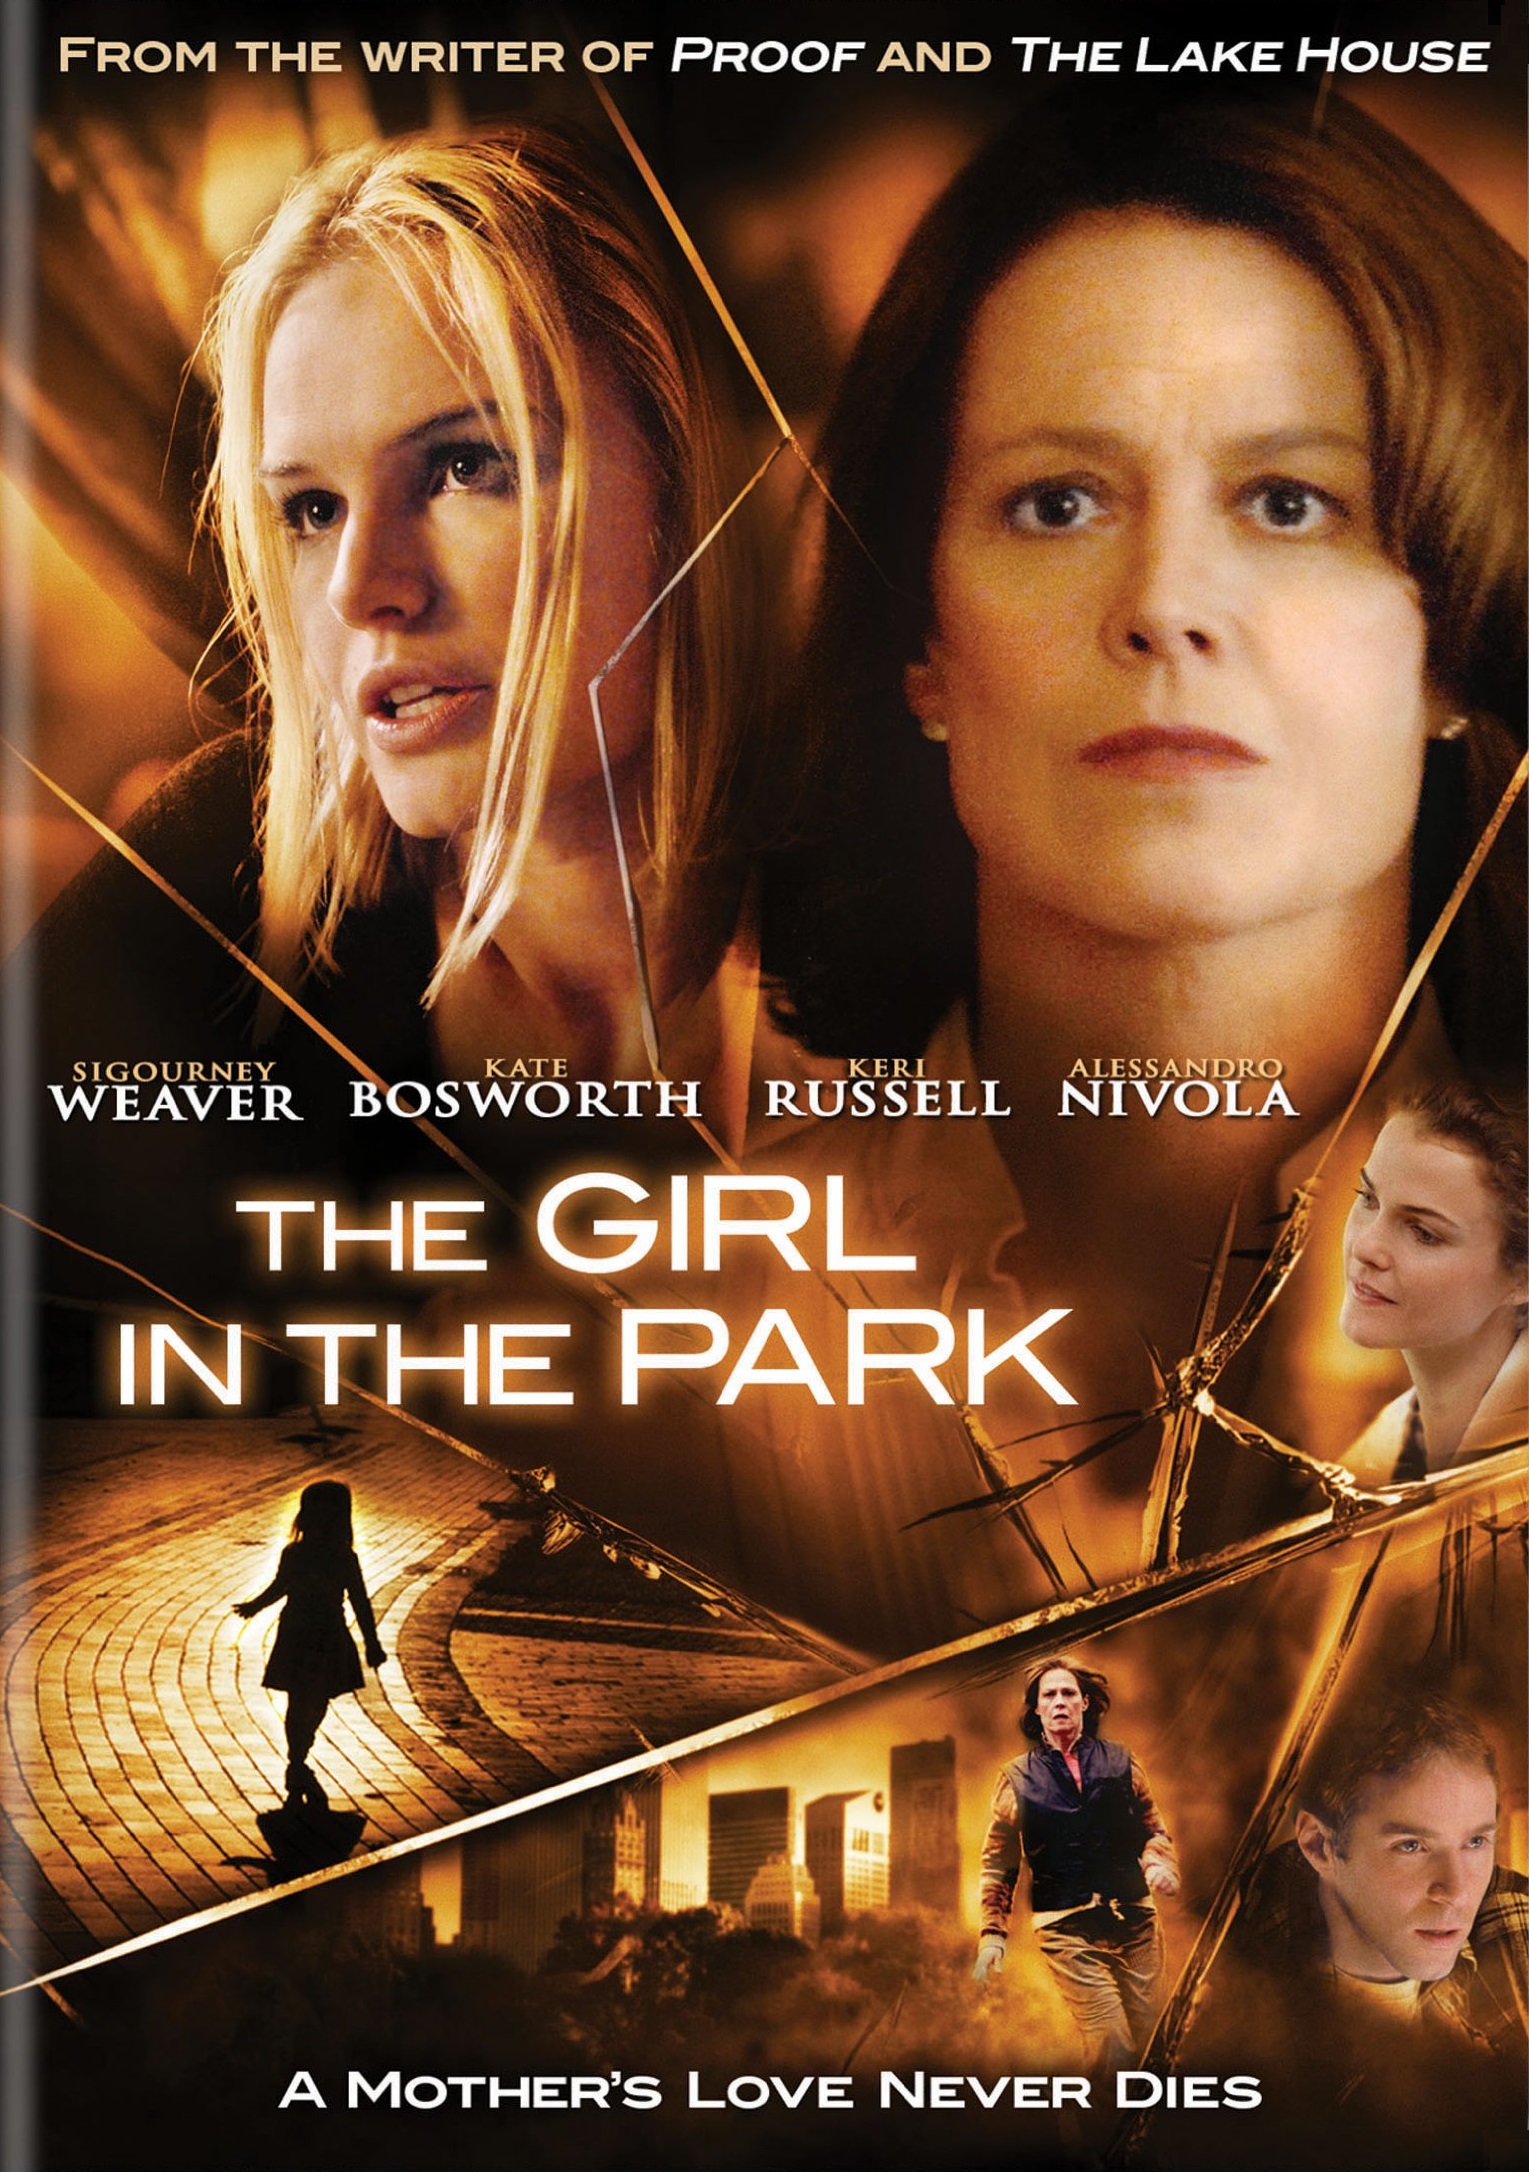 THE GIRL IN THE PARK